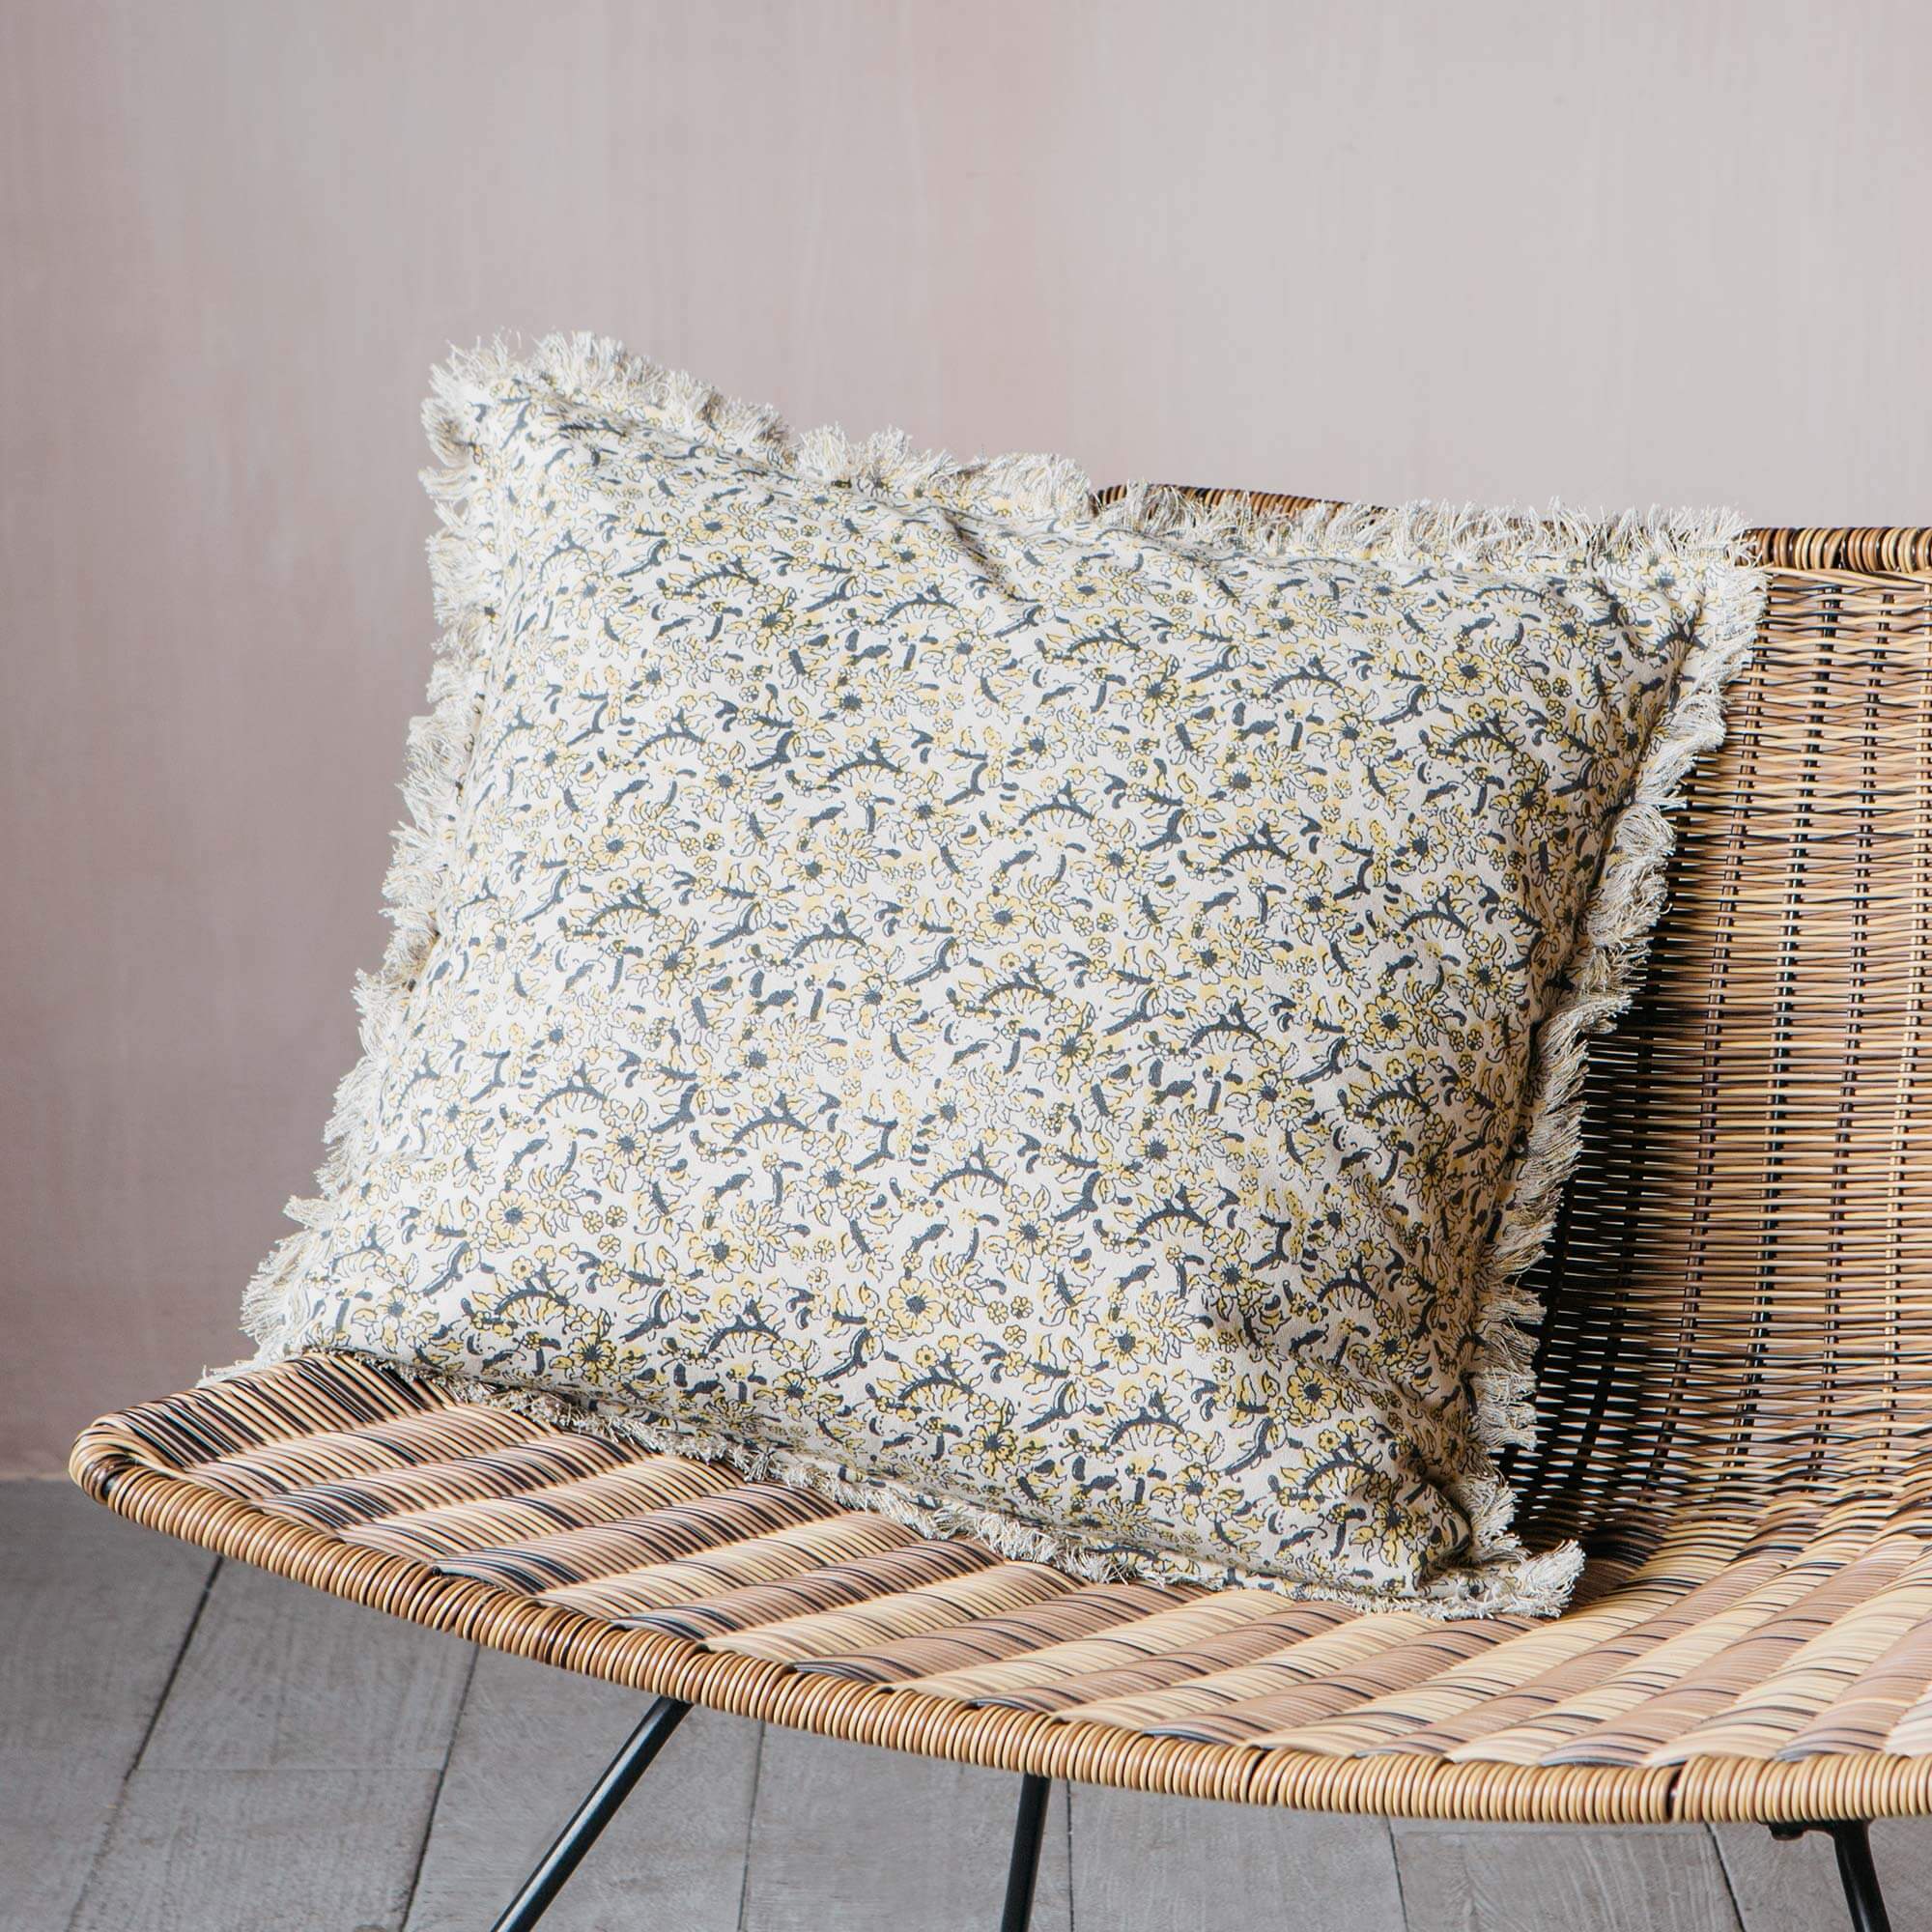 Read more about Graham and green yellow ditsy blossom printed cushion